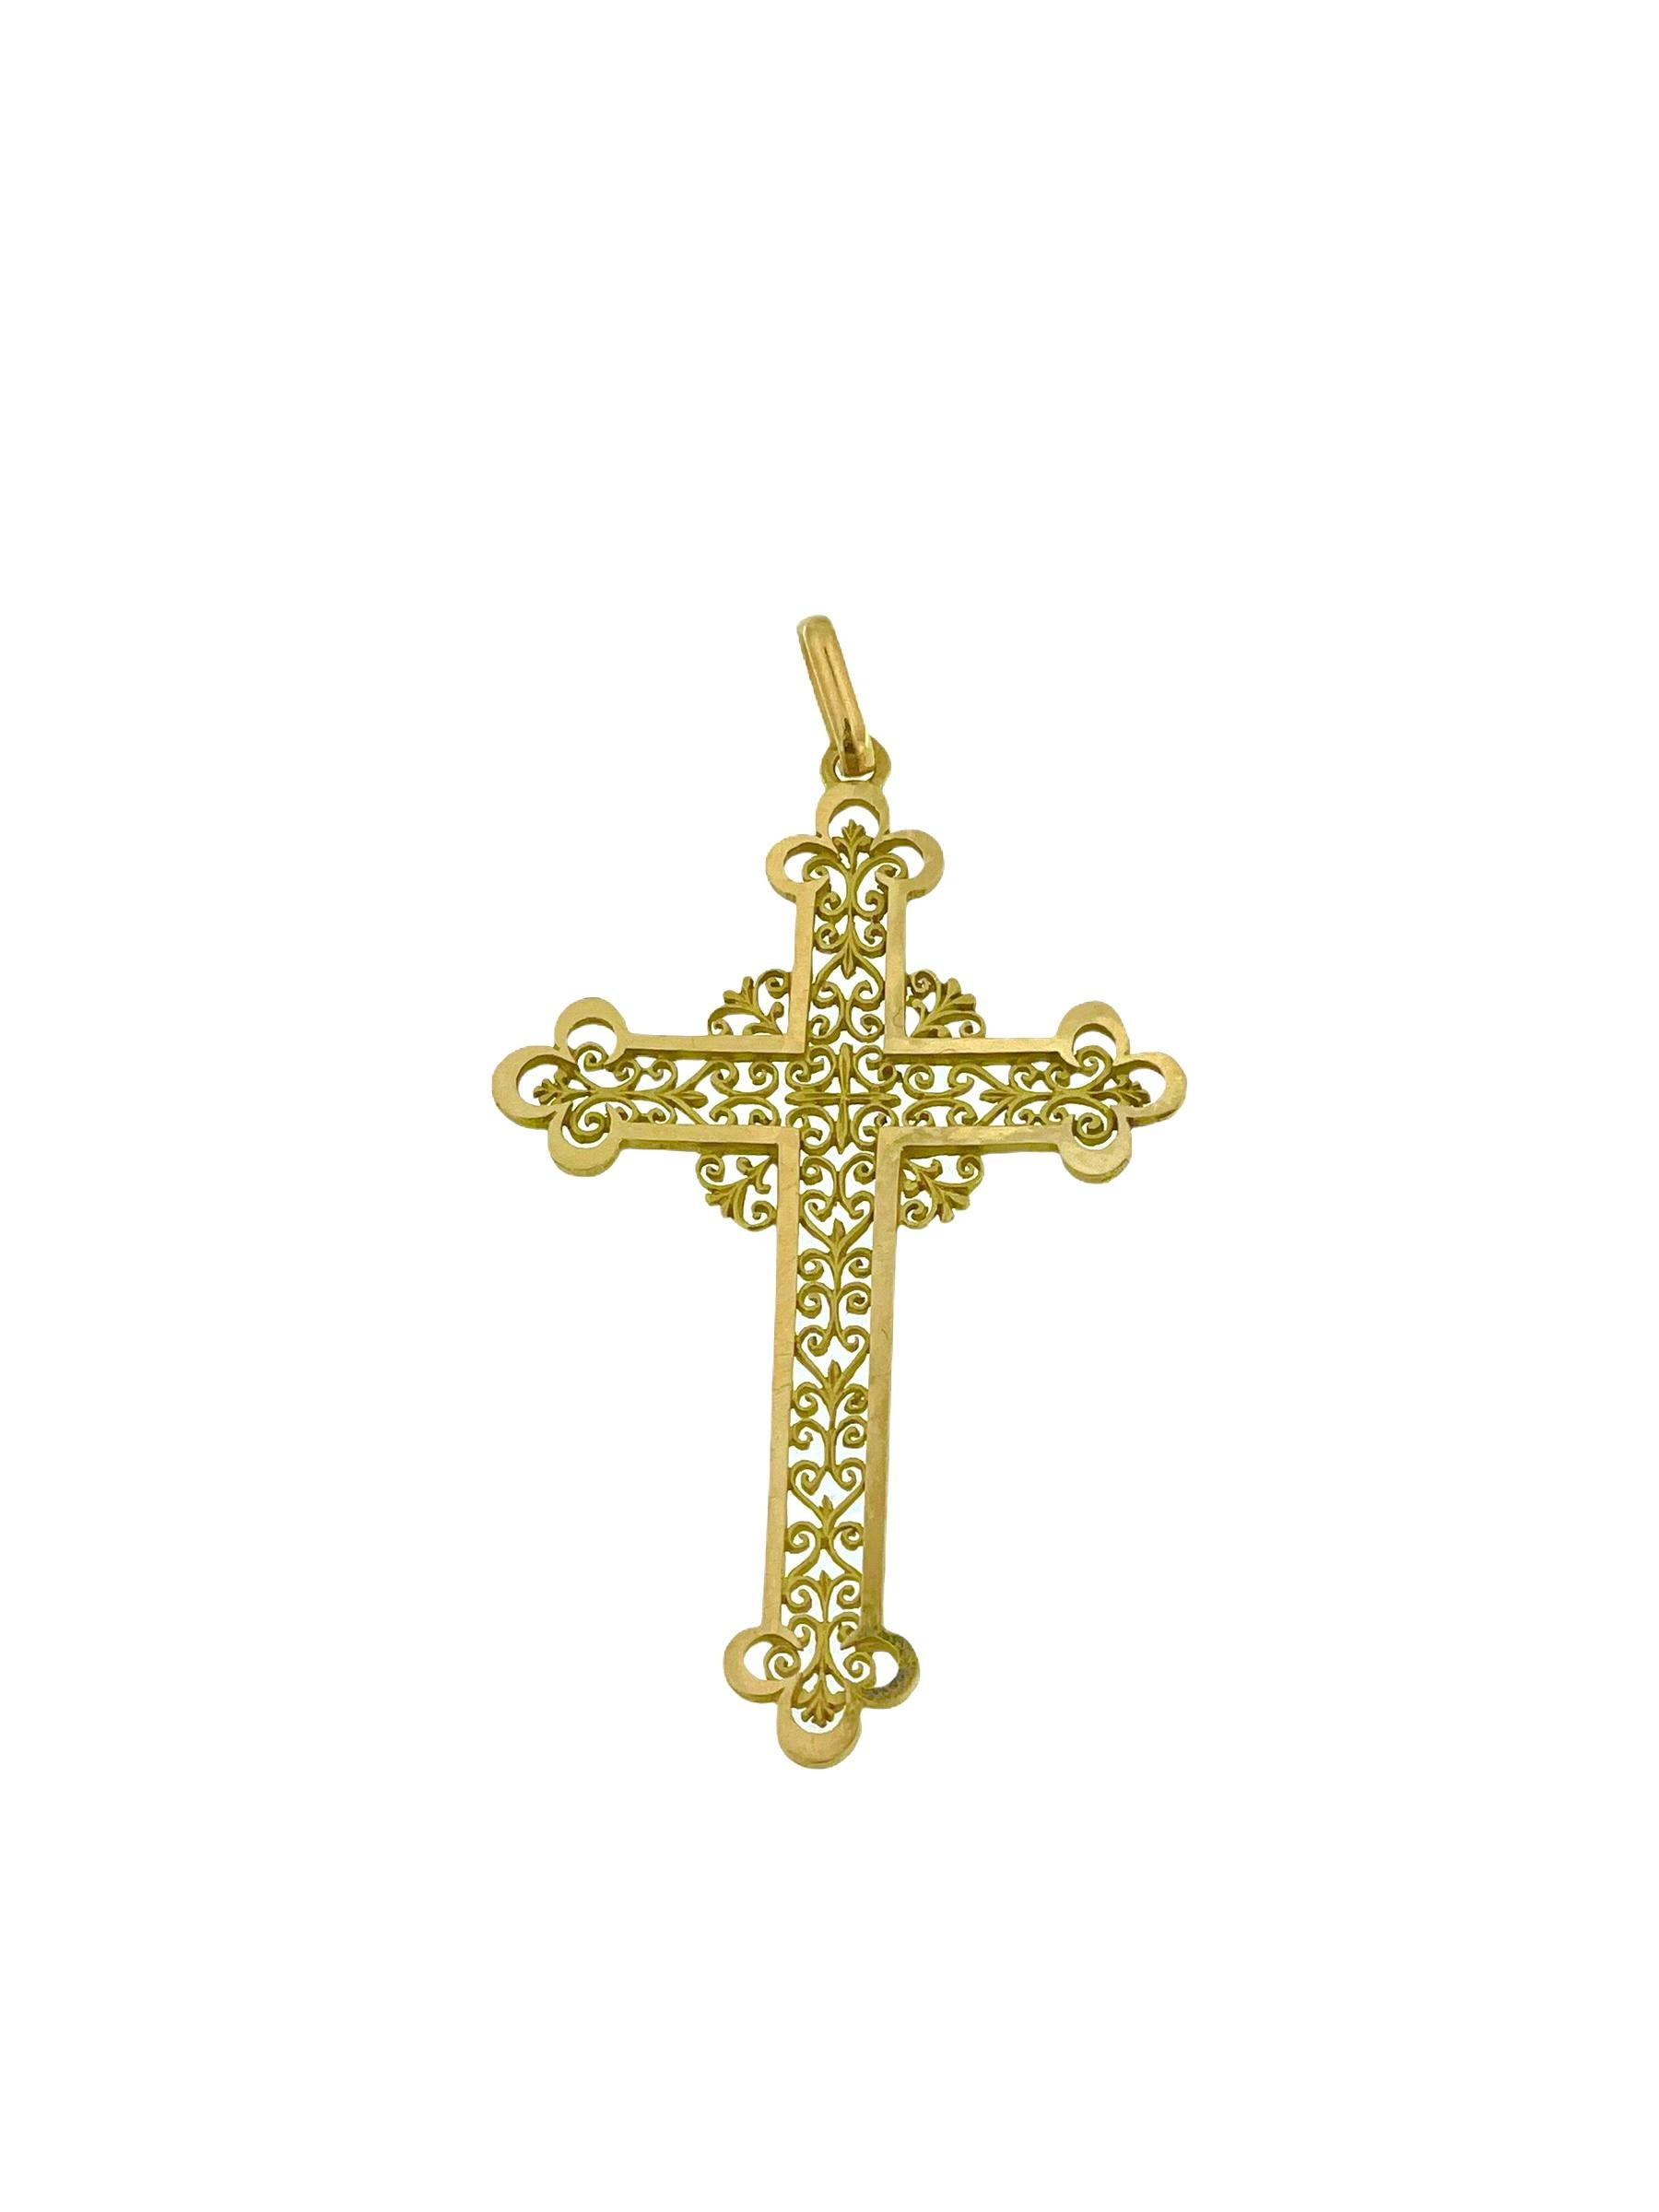 Vintage French Filigree Cross Yellow Gold In Excellent Condition For Sale In Esch-Sur-Alzette, LU